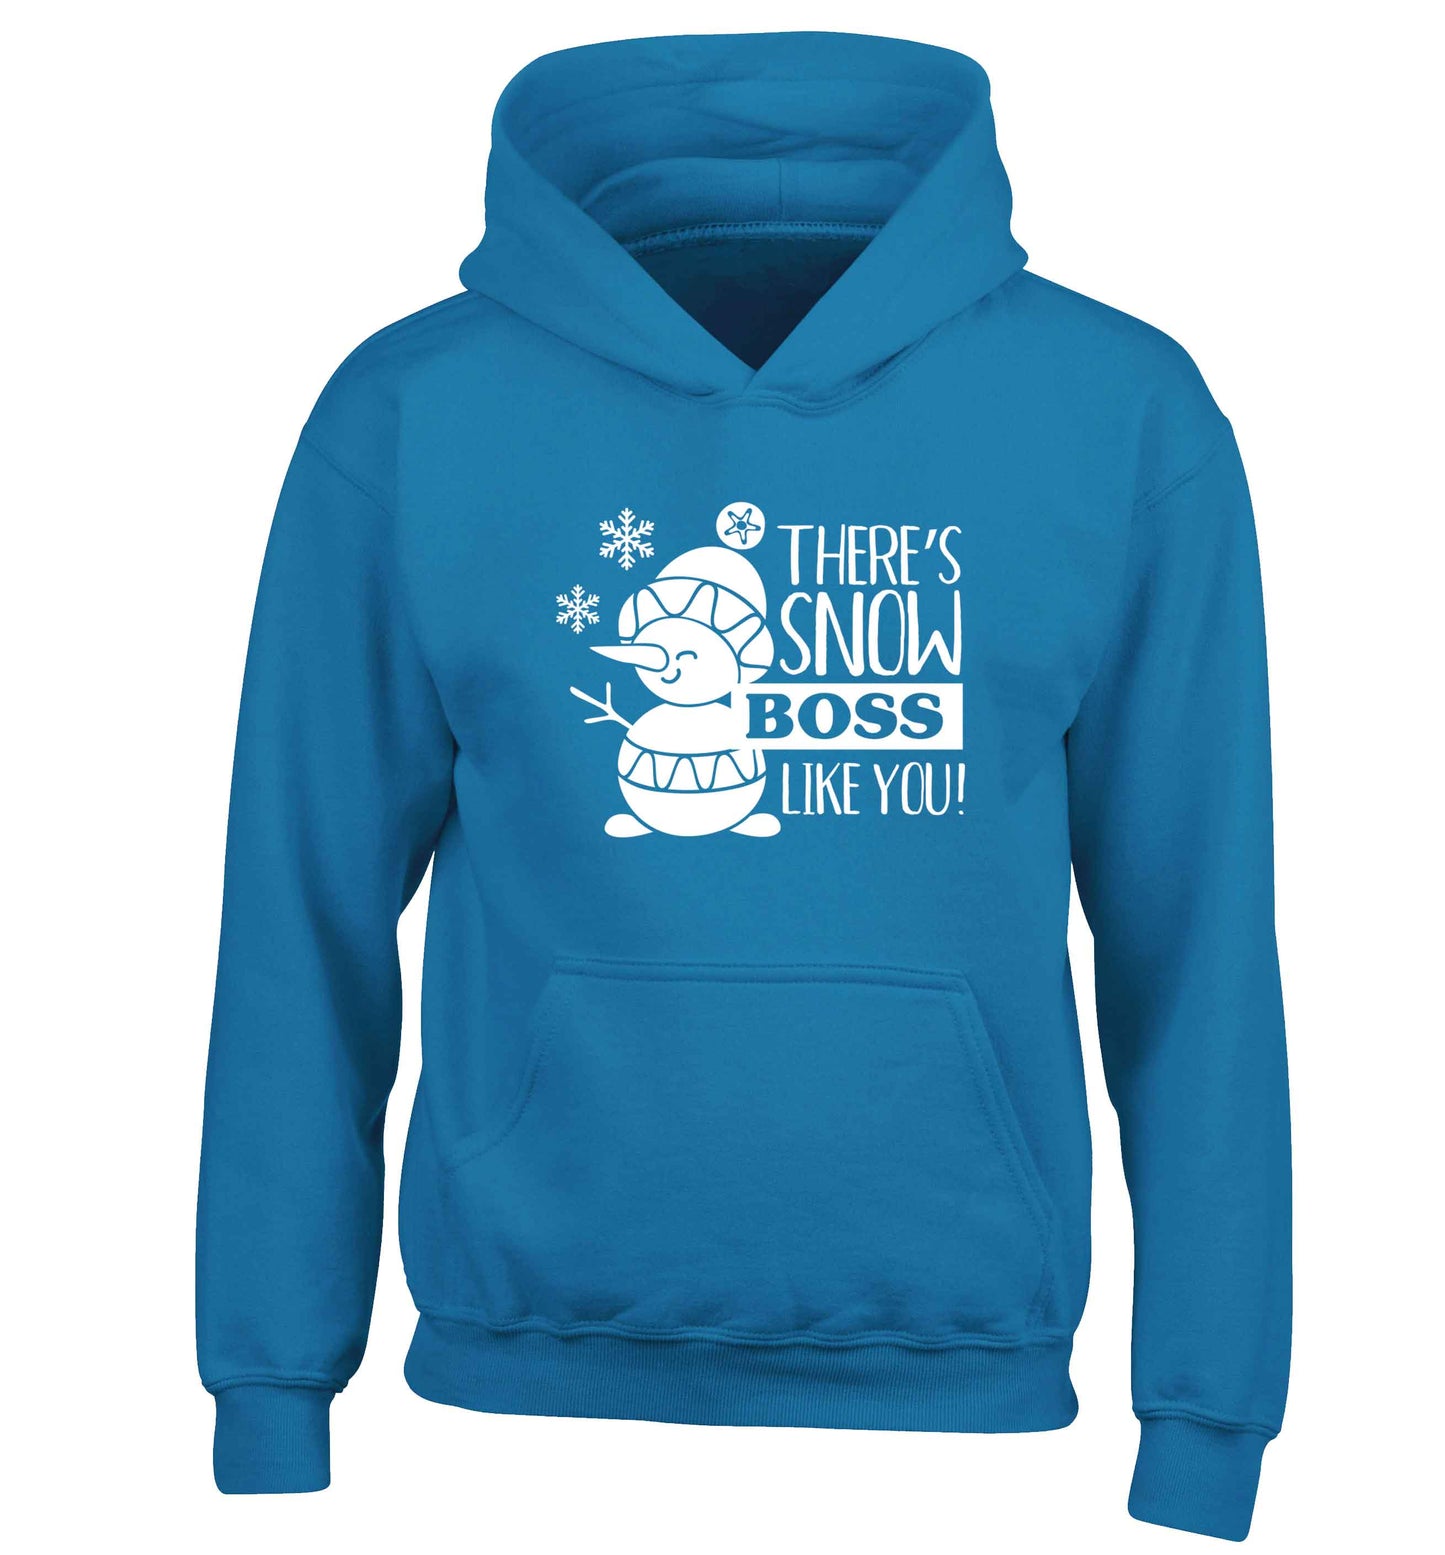 There's snow boss like you children's blue hoodie 12-13 Years